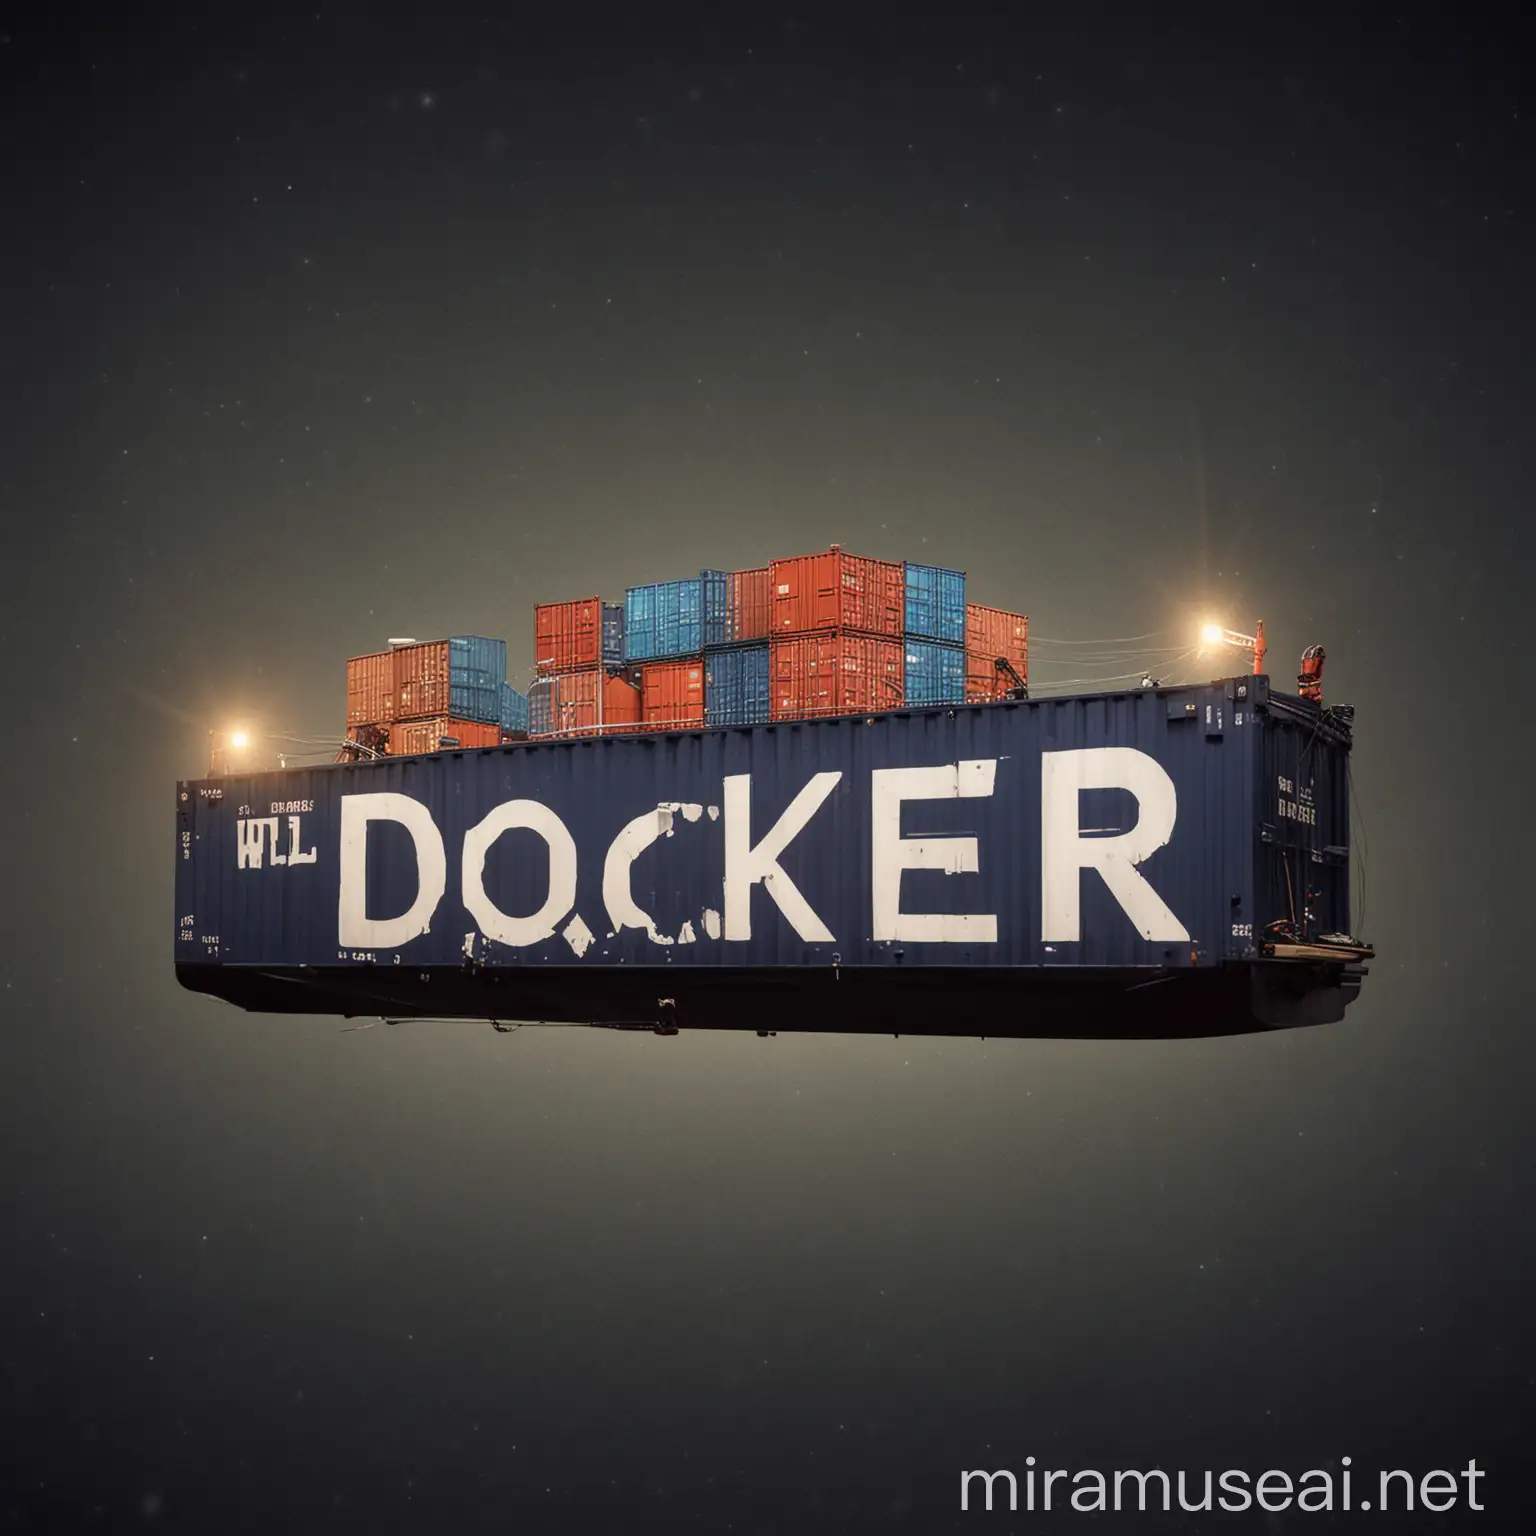 The docker logo is funny and has lights to make it more realistic
